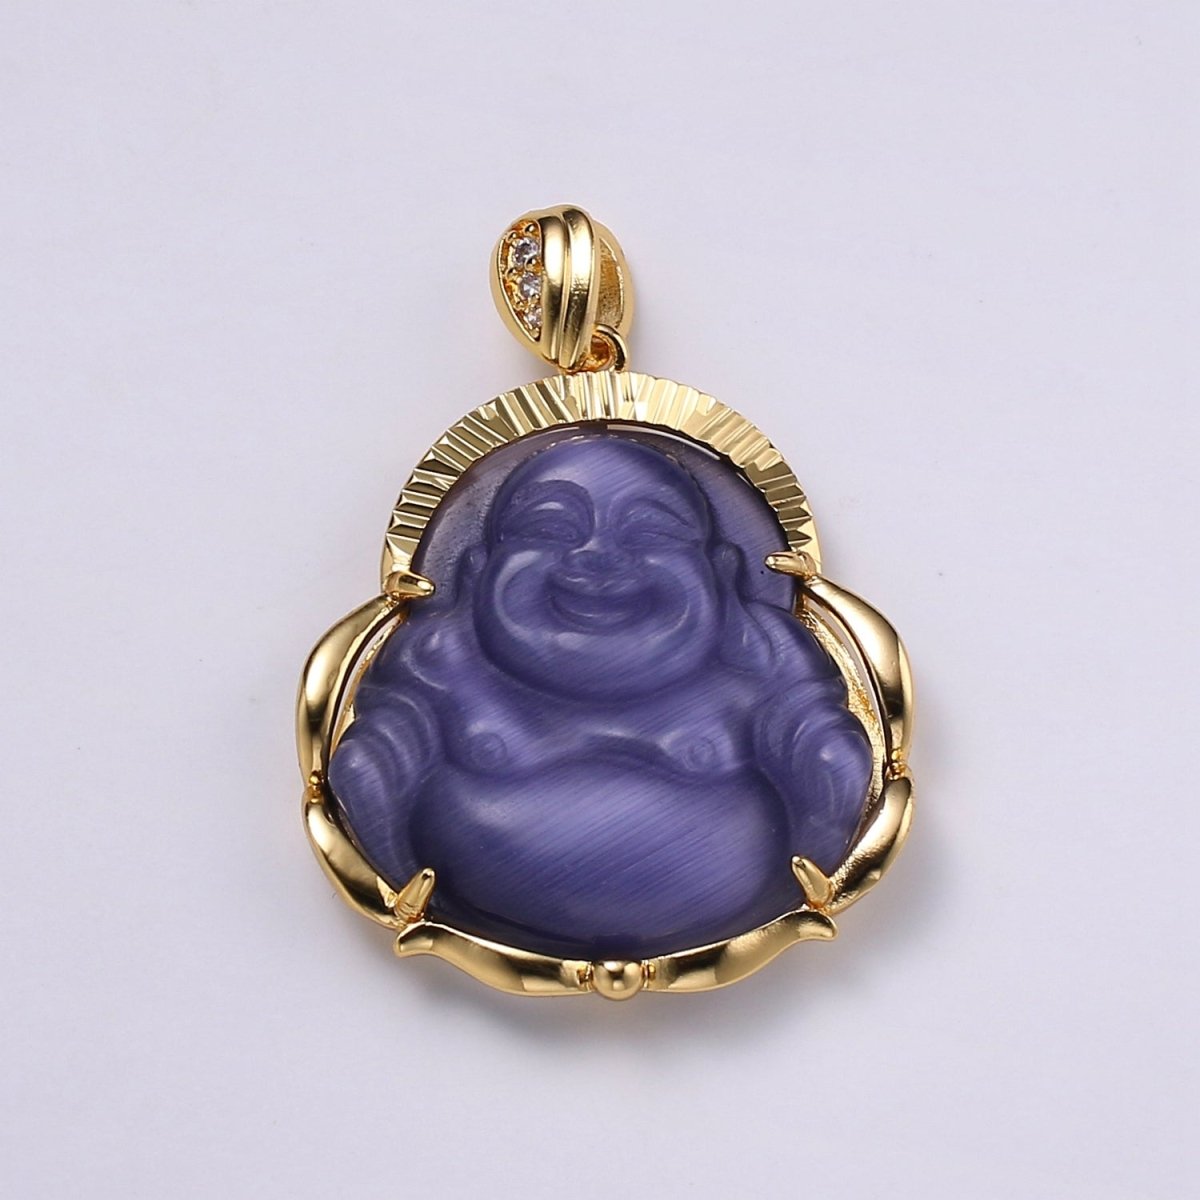 1x Gold Laughing Buddha Pendant Crystal Quartz Thai Buddha Charm Necklace in 14k Gold Filled Pendant for Statement Necklace O-203 ~ O-210 O-226 ~ O-232 - DLUXCA